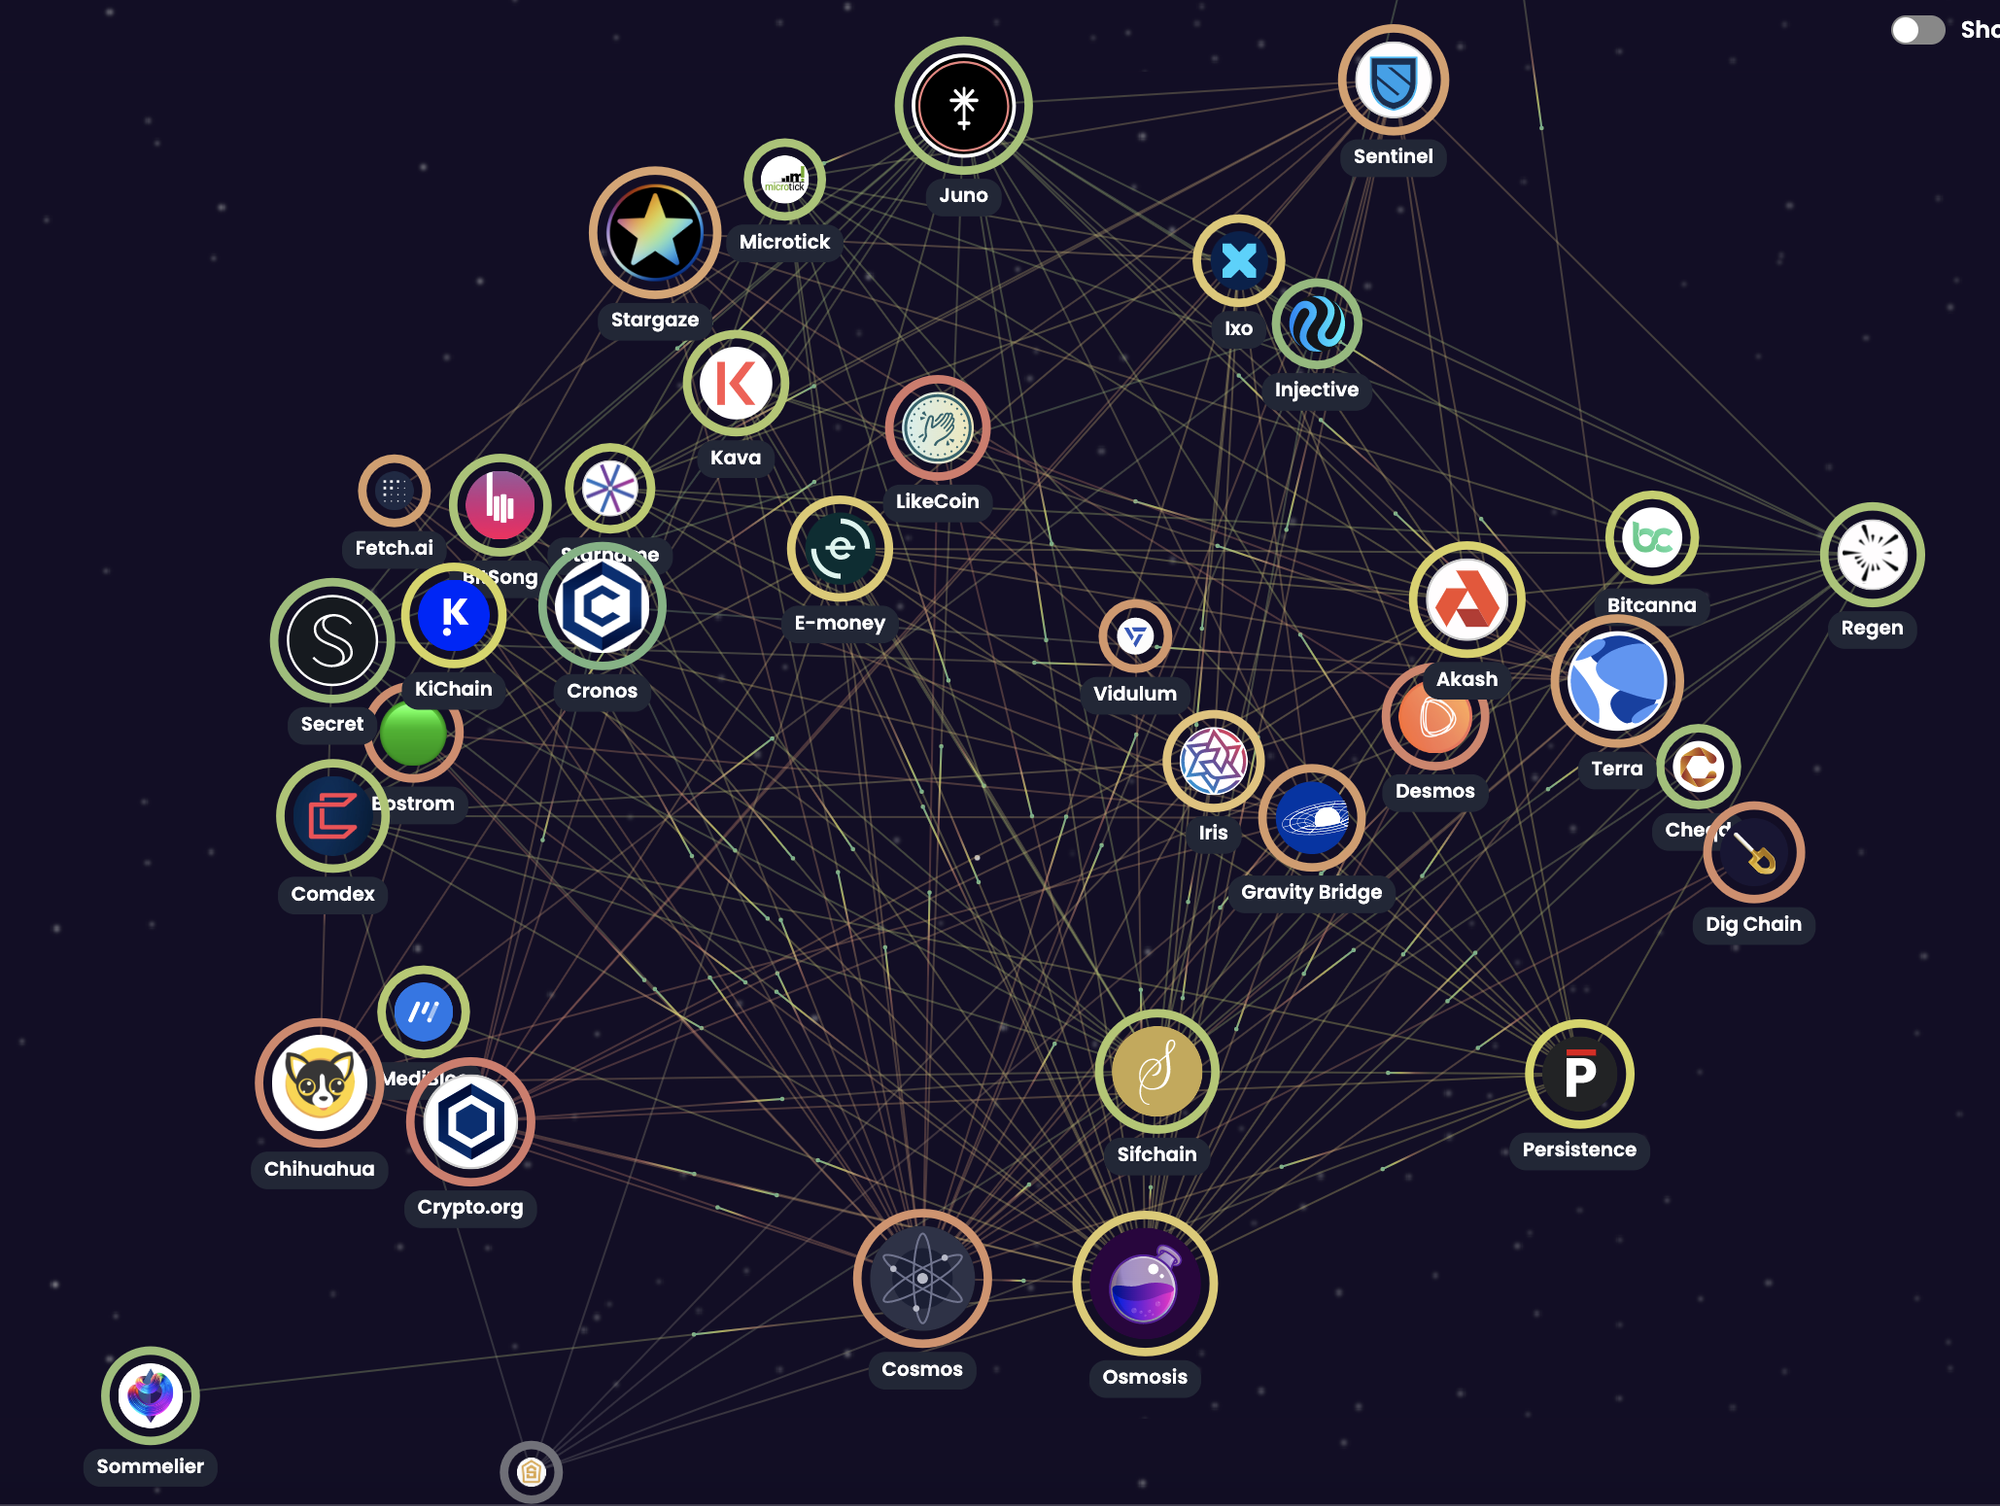 Link to Map Of Zones showing all the different blockchains on Cosmos interacting - https://mapofzones.com/?testnet=false&period=24&tableOrderBy=totalIbcTxs&tableOrderSort=desc&fullscreen=true 